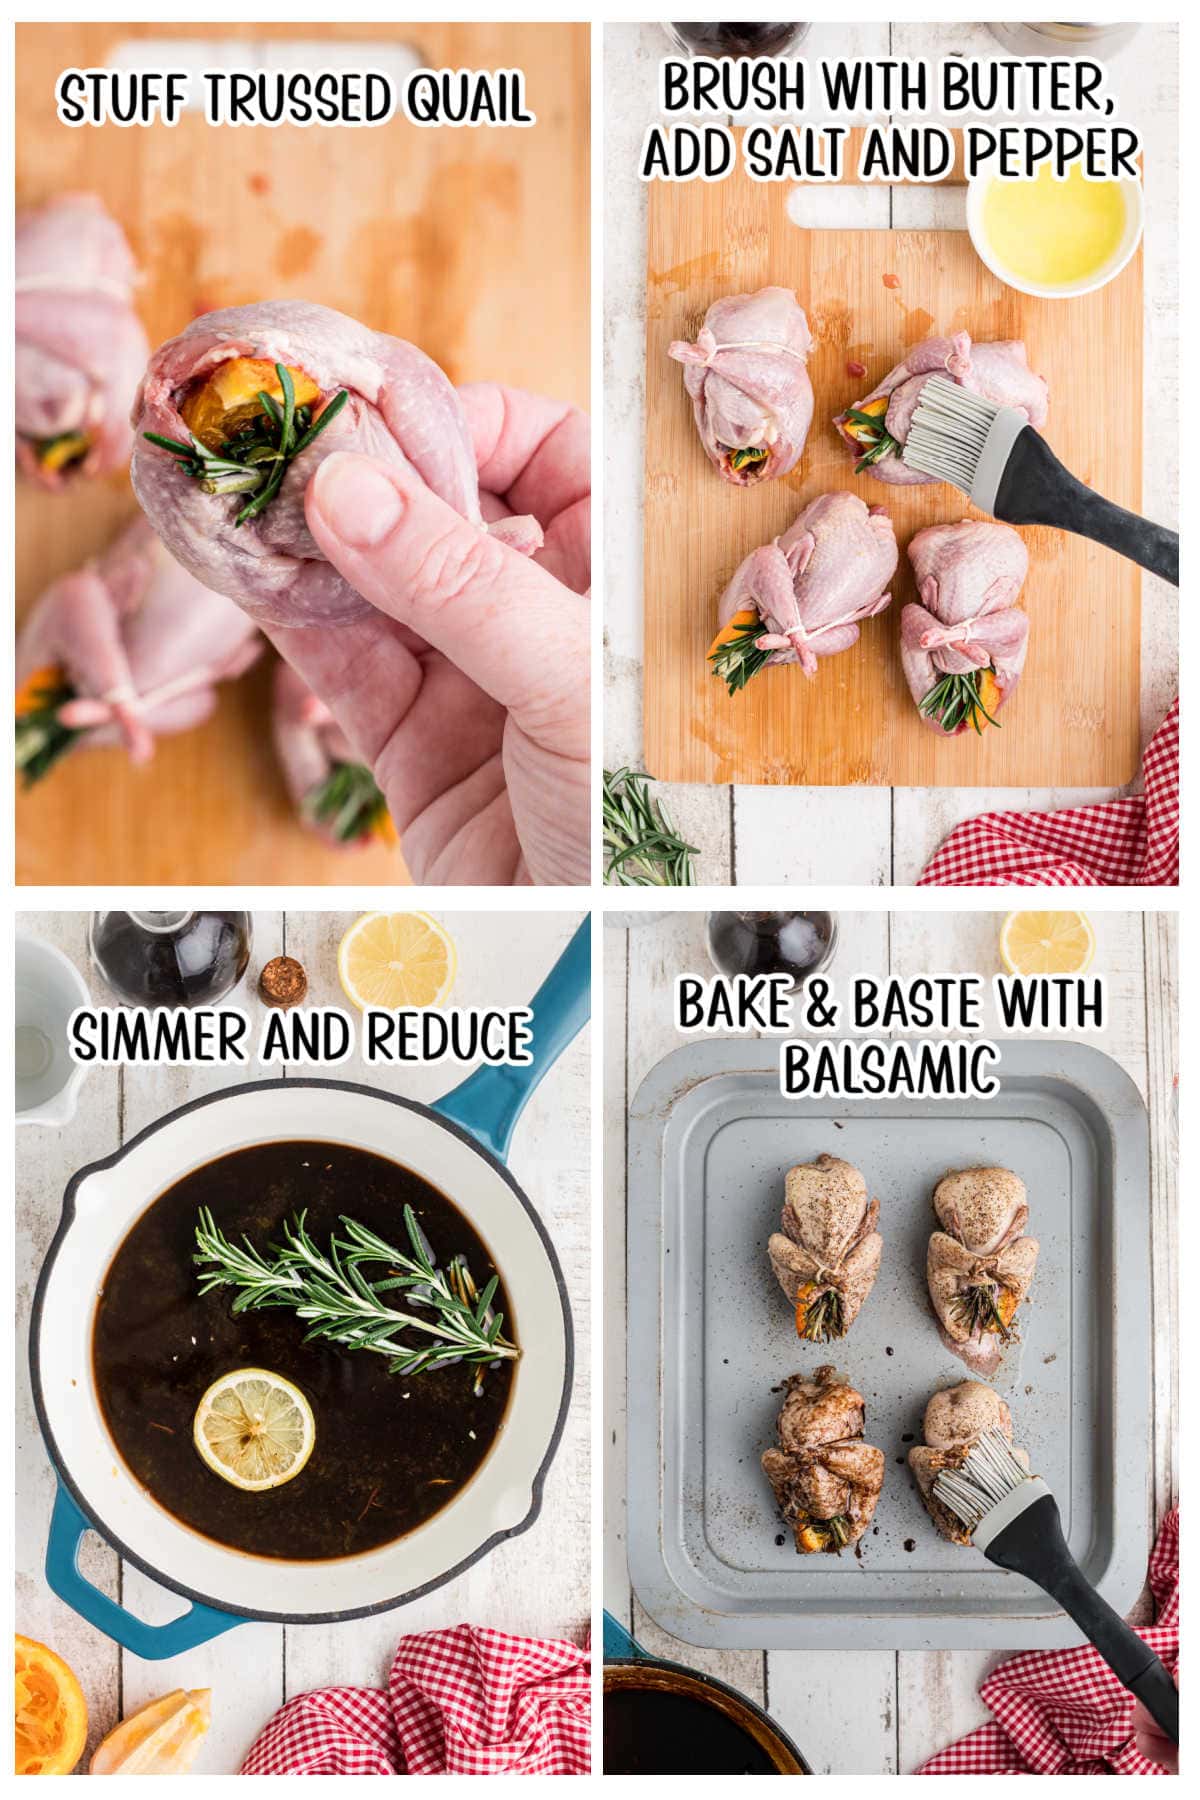 Step by step images showing how to make roasted quail.